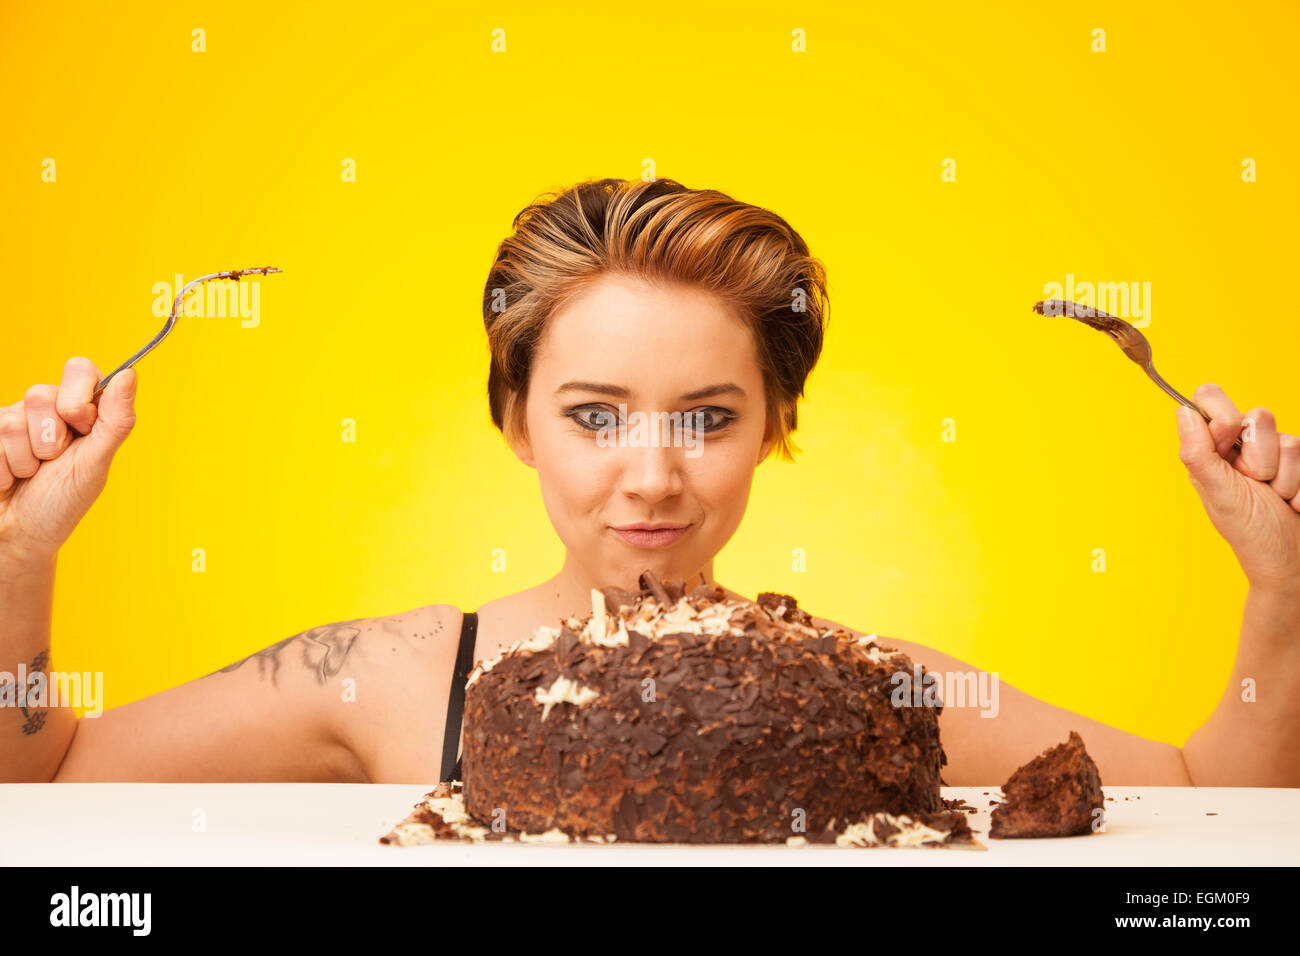 Young woman about to eat a large chocolate cake. Stock Photo